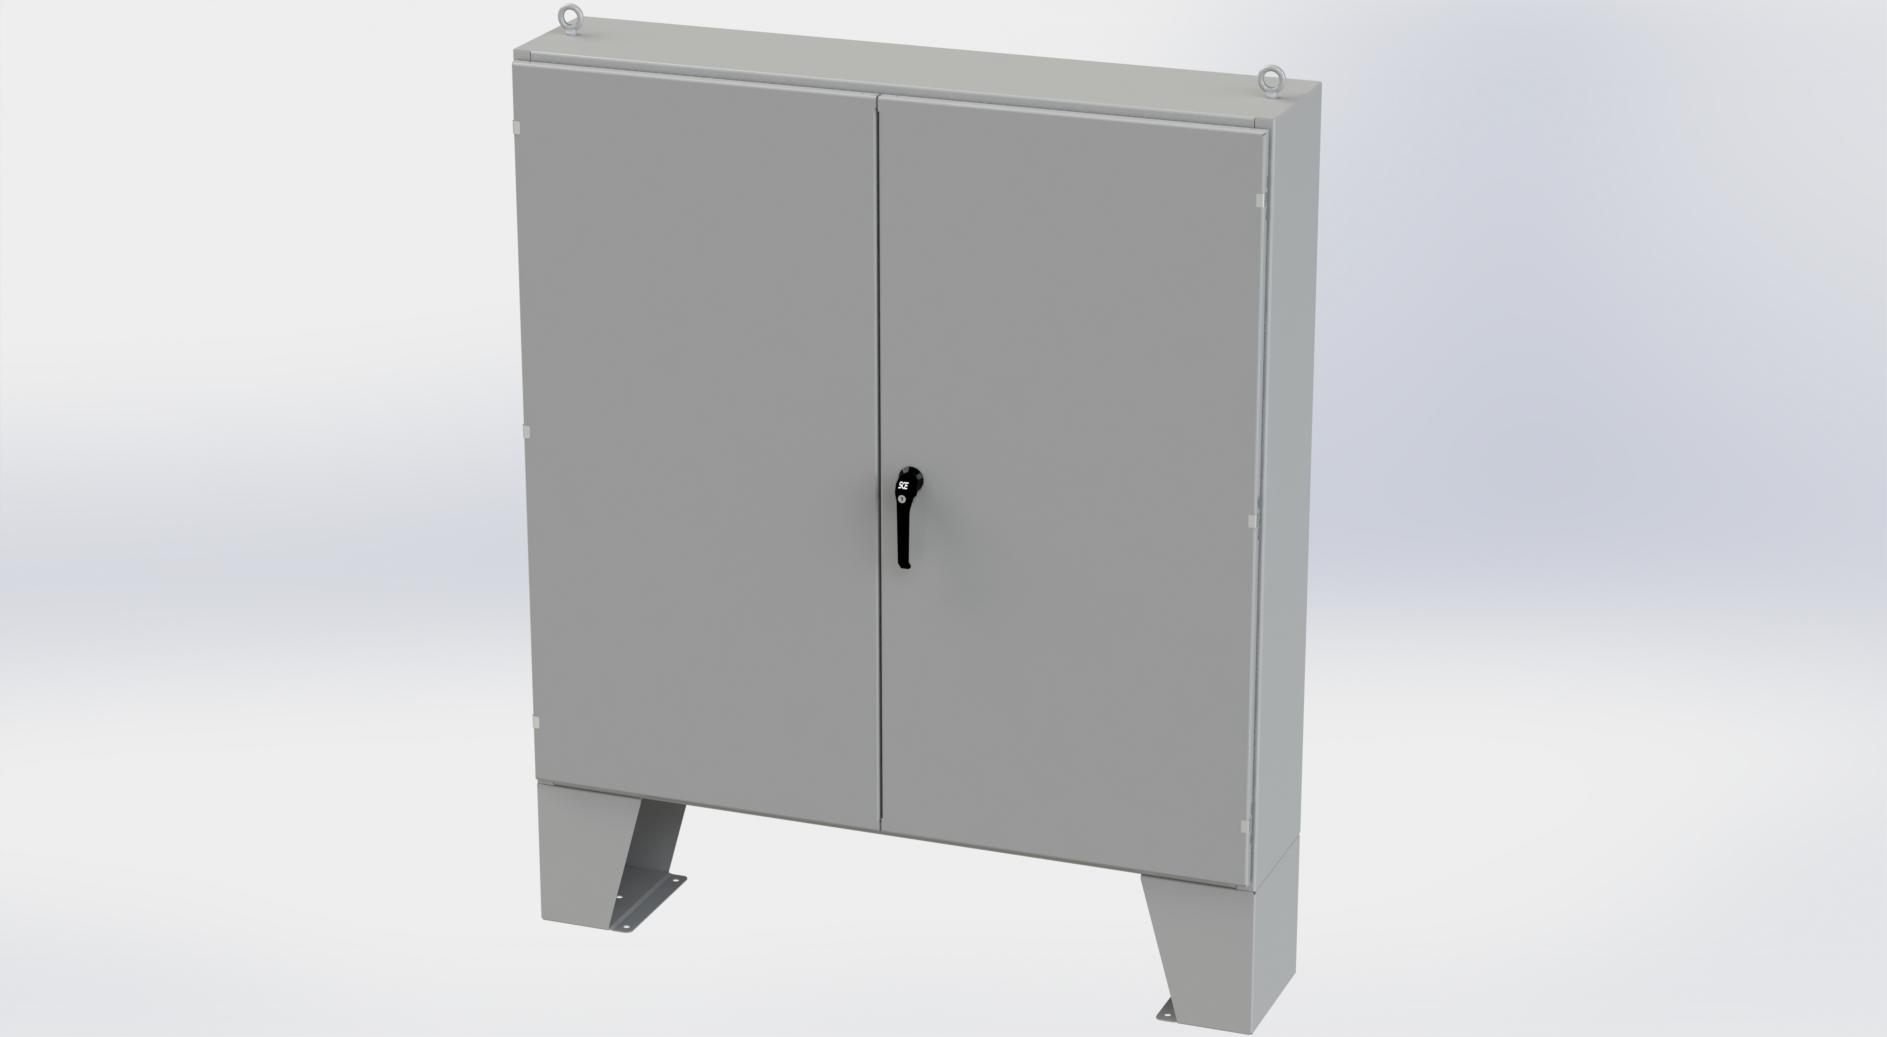 Saginaw Control SCE-606012LP 2DR LP Enclosure, Height:60.00", Width:60.00", Depth:12.00", ANSI-61 gray powder coating inside and out. Optional sub-panels are powder coated white.